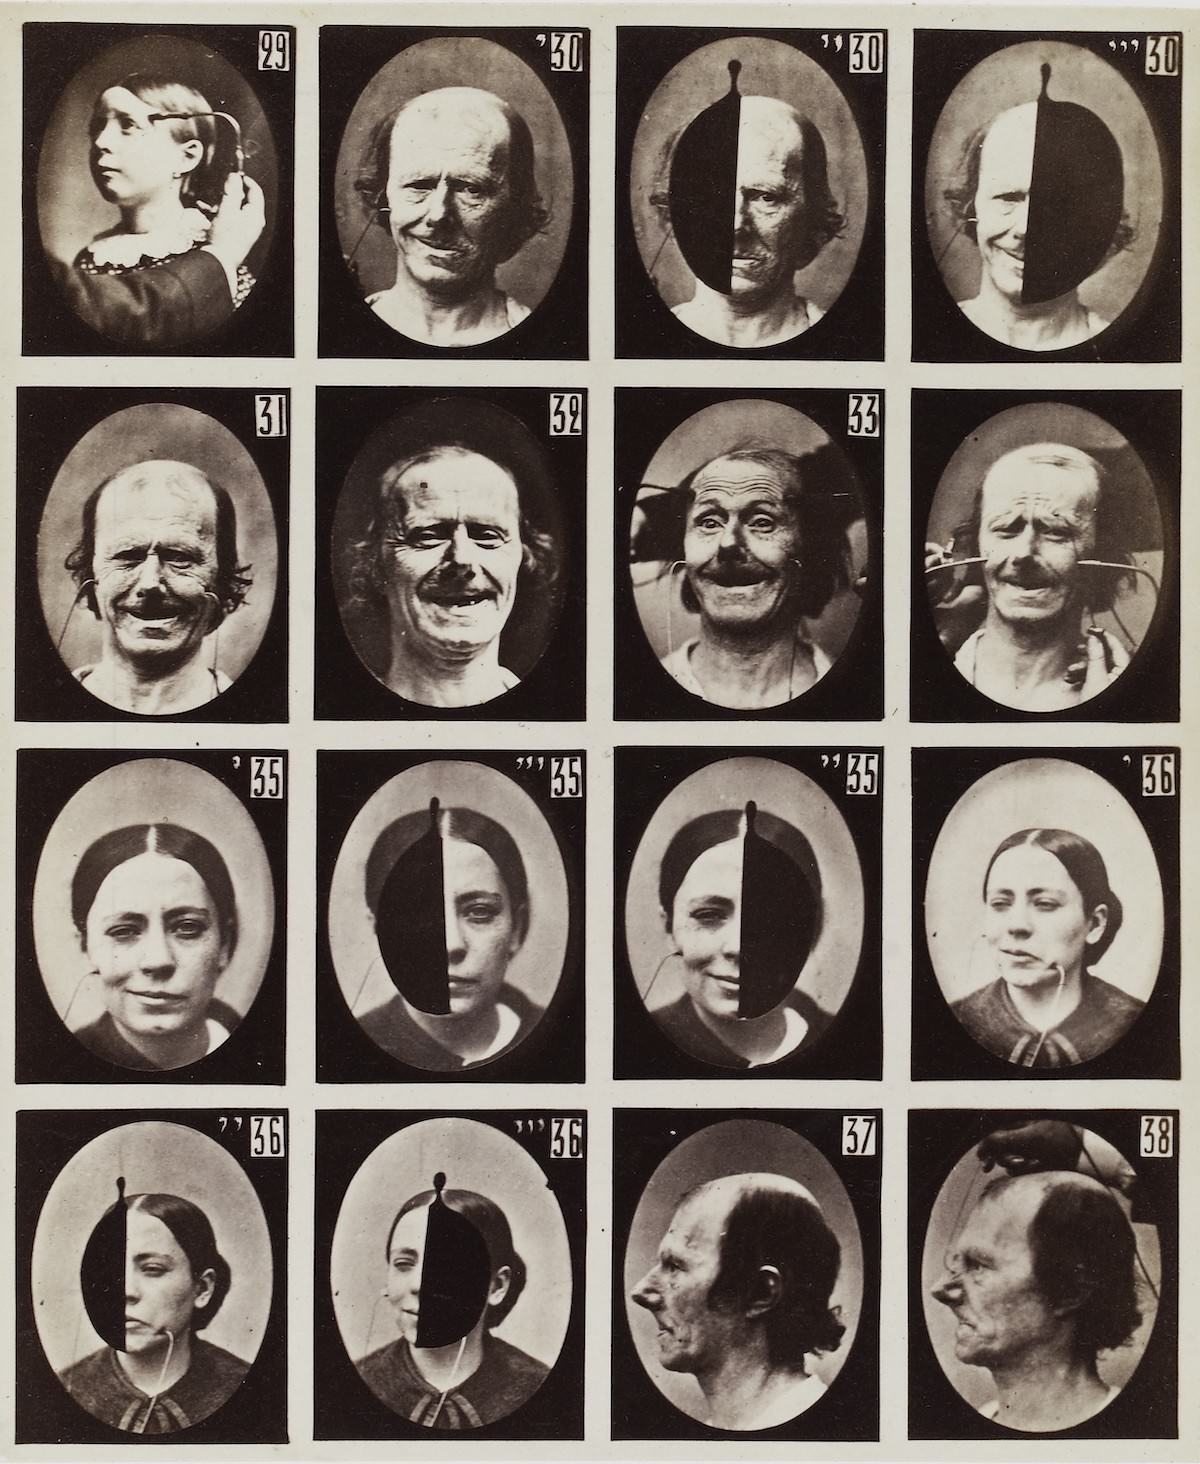 Stunning Illustrations from the Mechanism of Human Physiognomy by Guillaume-Benjamin-Amand Duchenne de Boulogne